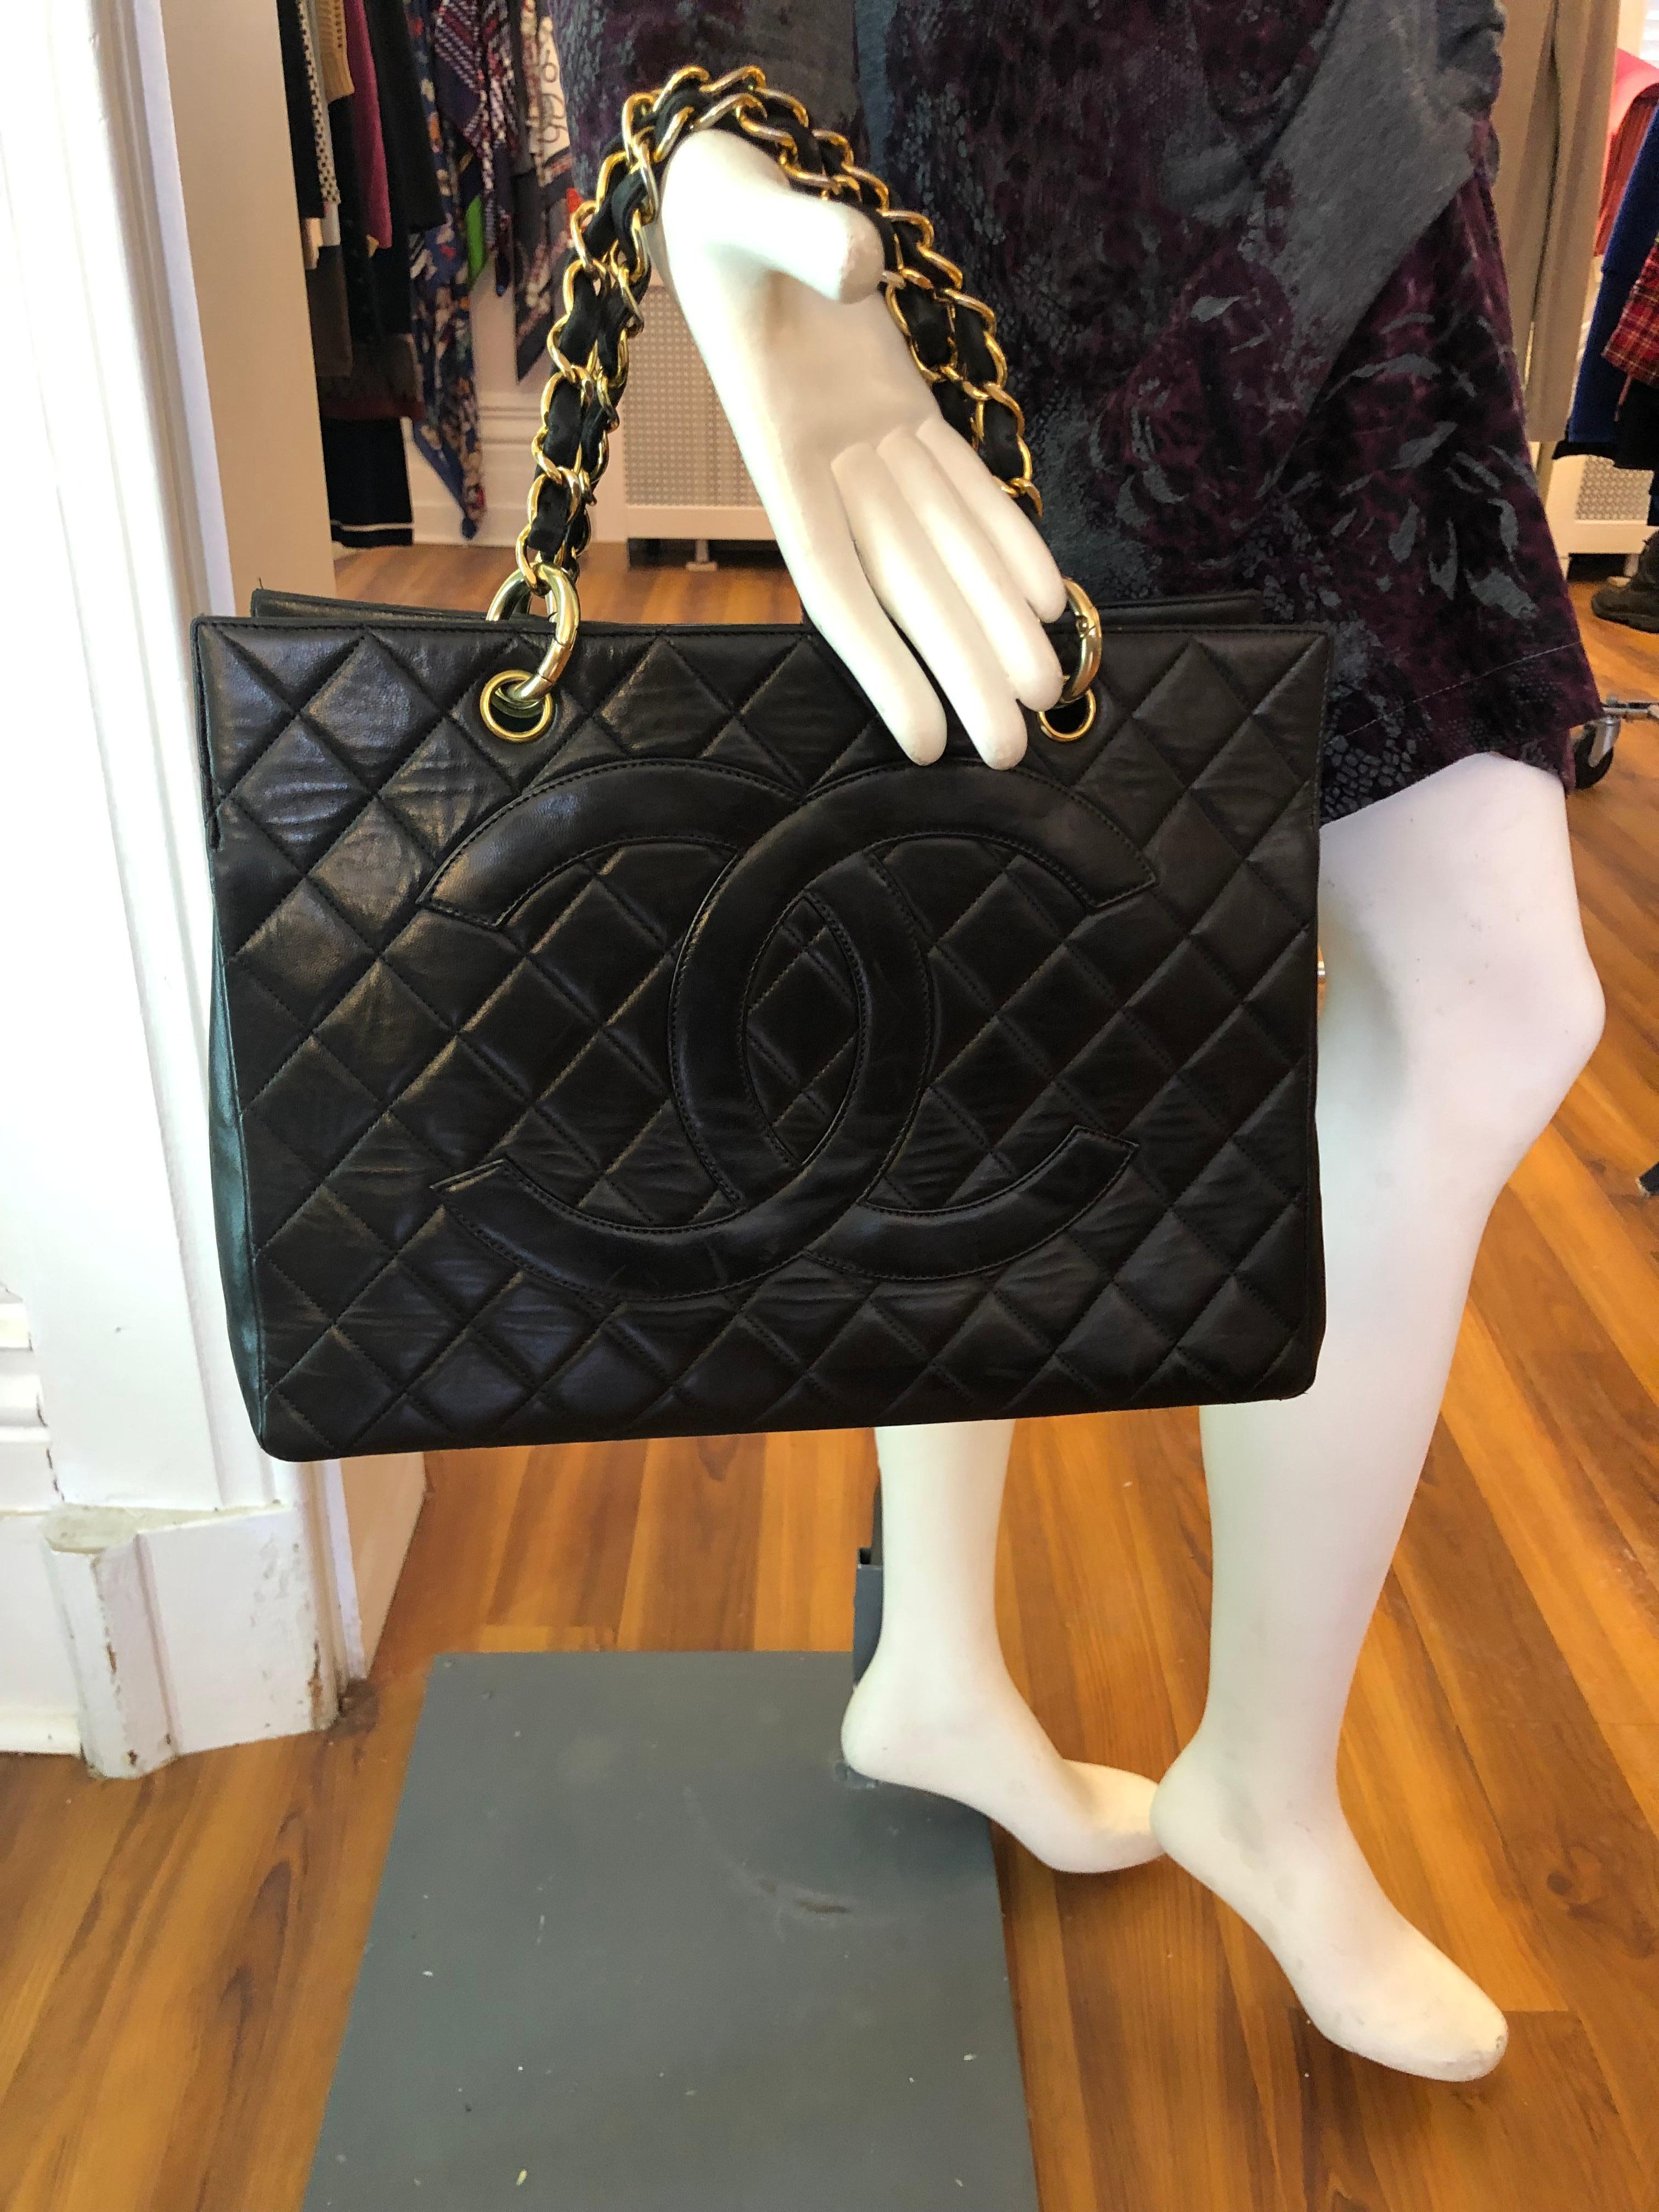 Made in France this Chanel quilted caviar leather bag is in very good condition. It features an interlocking CC logo at the front; interwoven leather/chain strap; leather lining with one zip pocket and one open; a rectangle body; open top; gold-tone